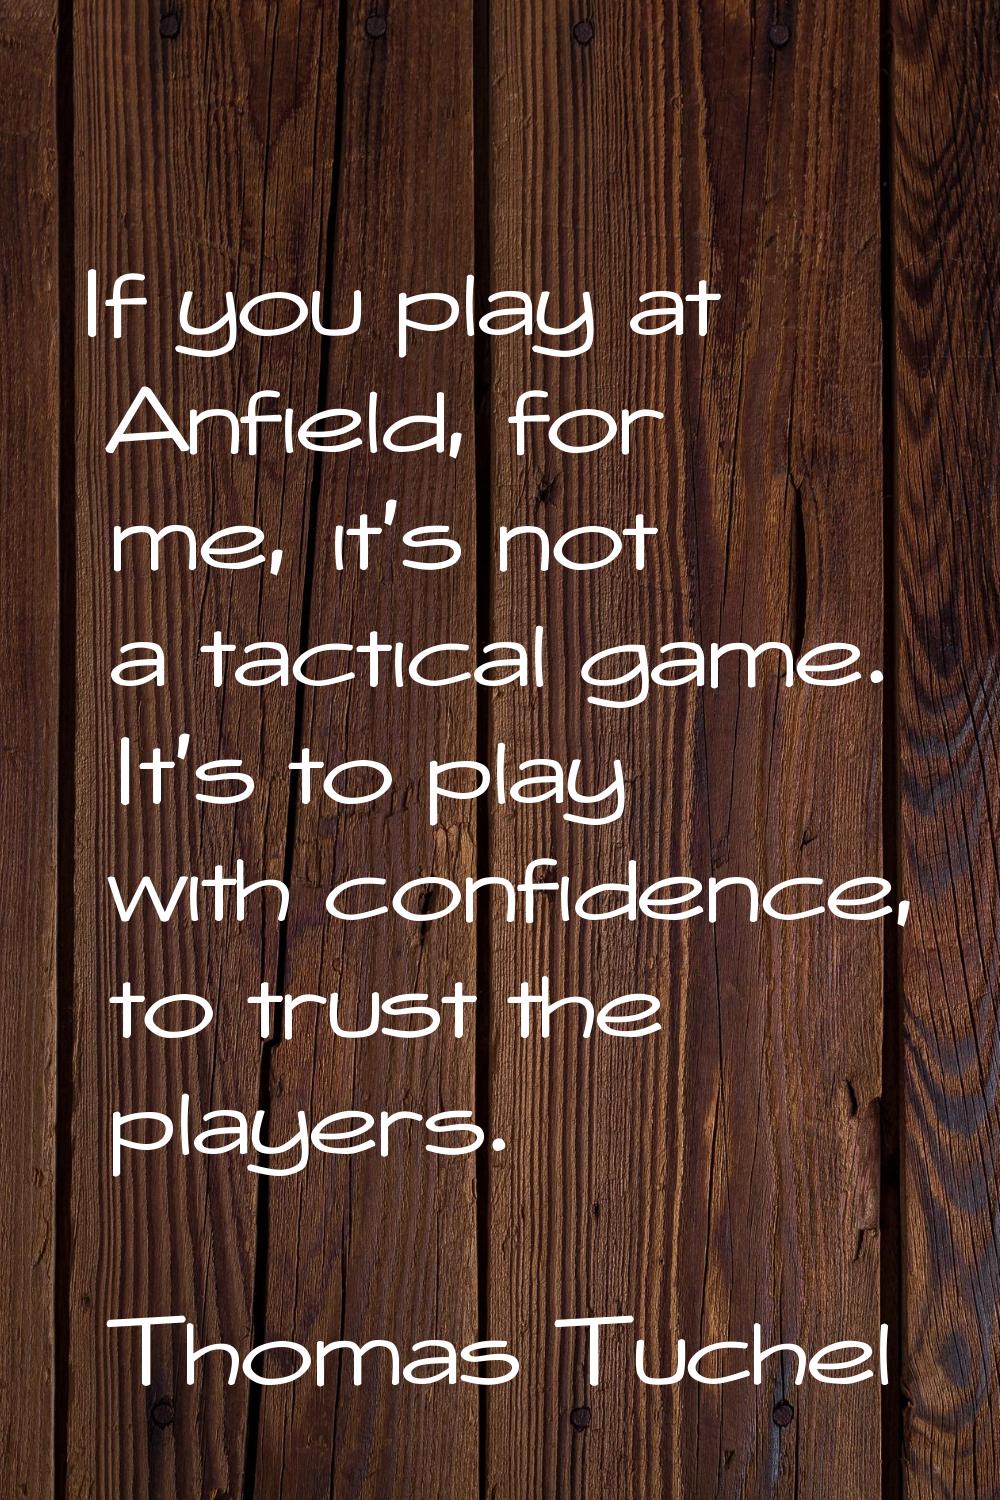 If you play at Anfield, for me, it's not a tactical game. It's to play with confidence, to trust th